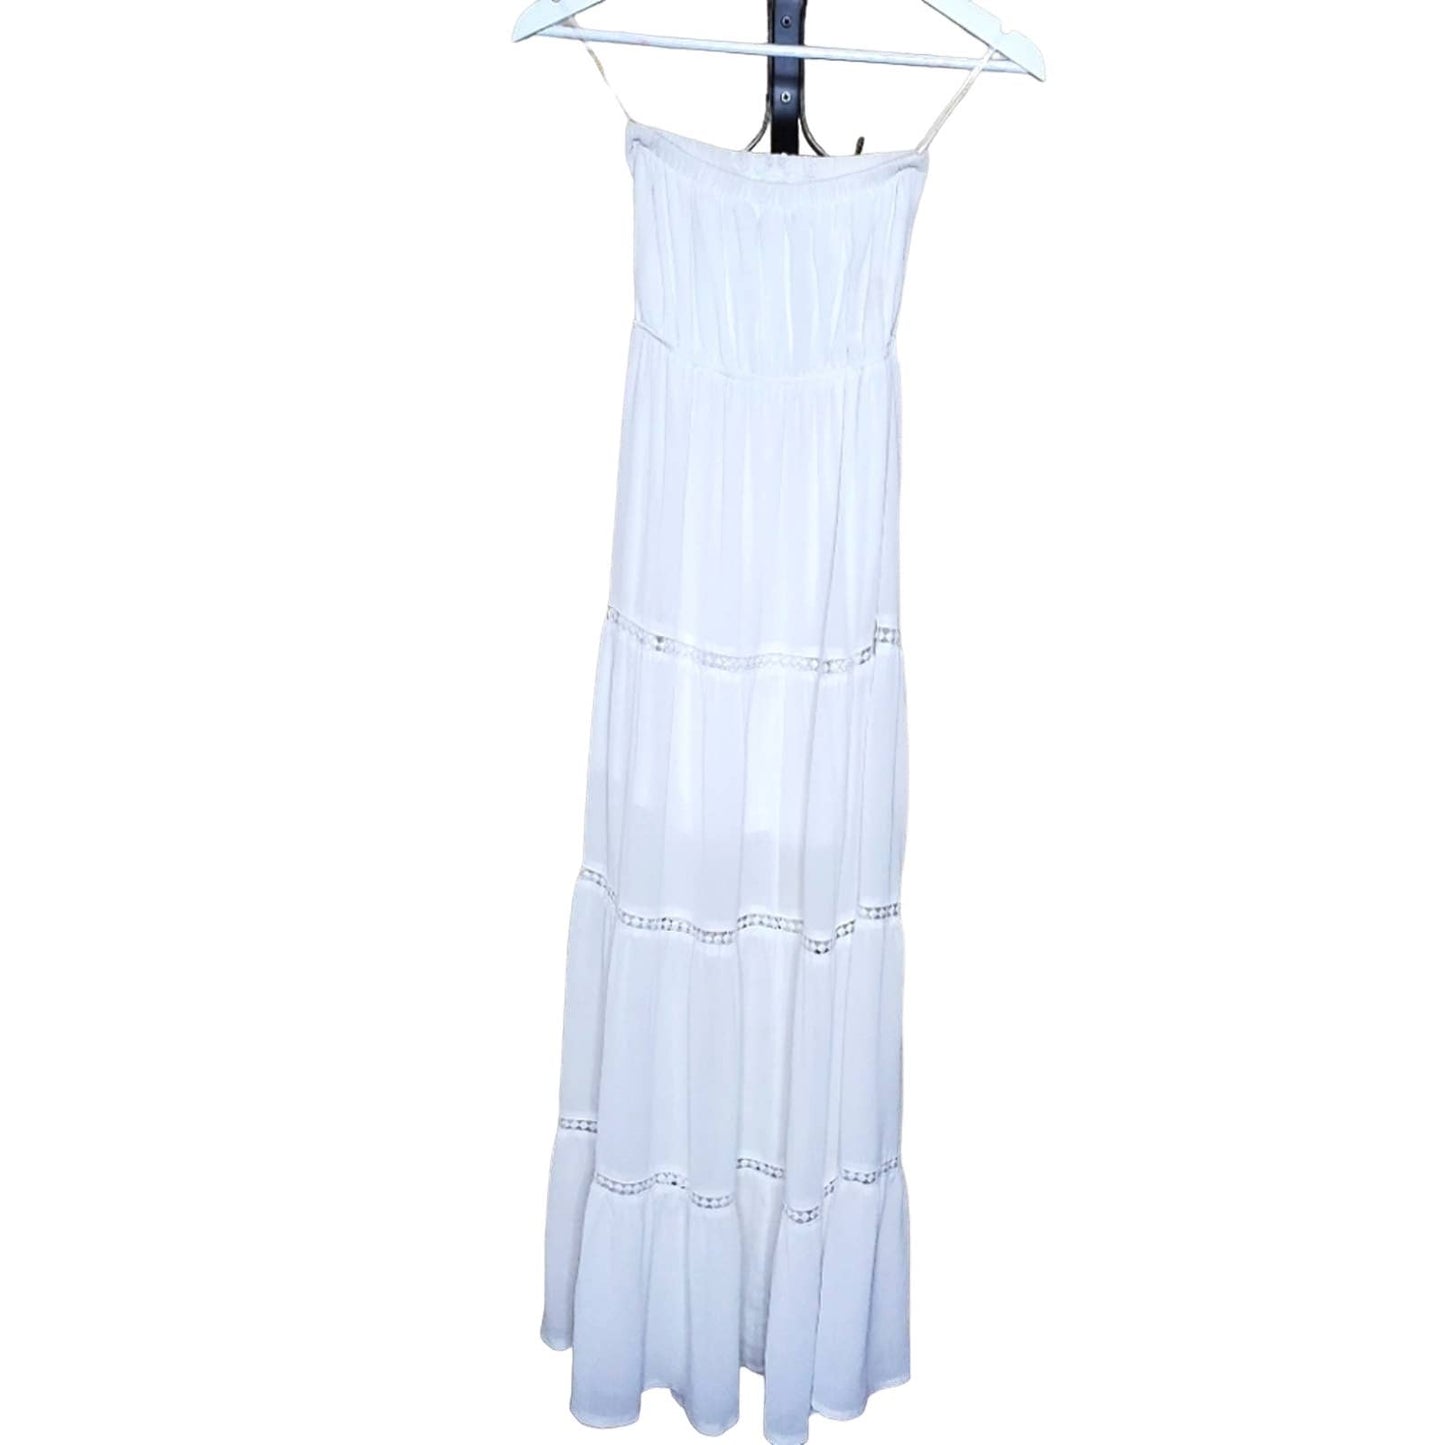 PARISIAN Strapless Long White Dress with Sleeves, Size 2